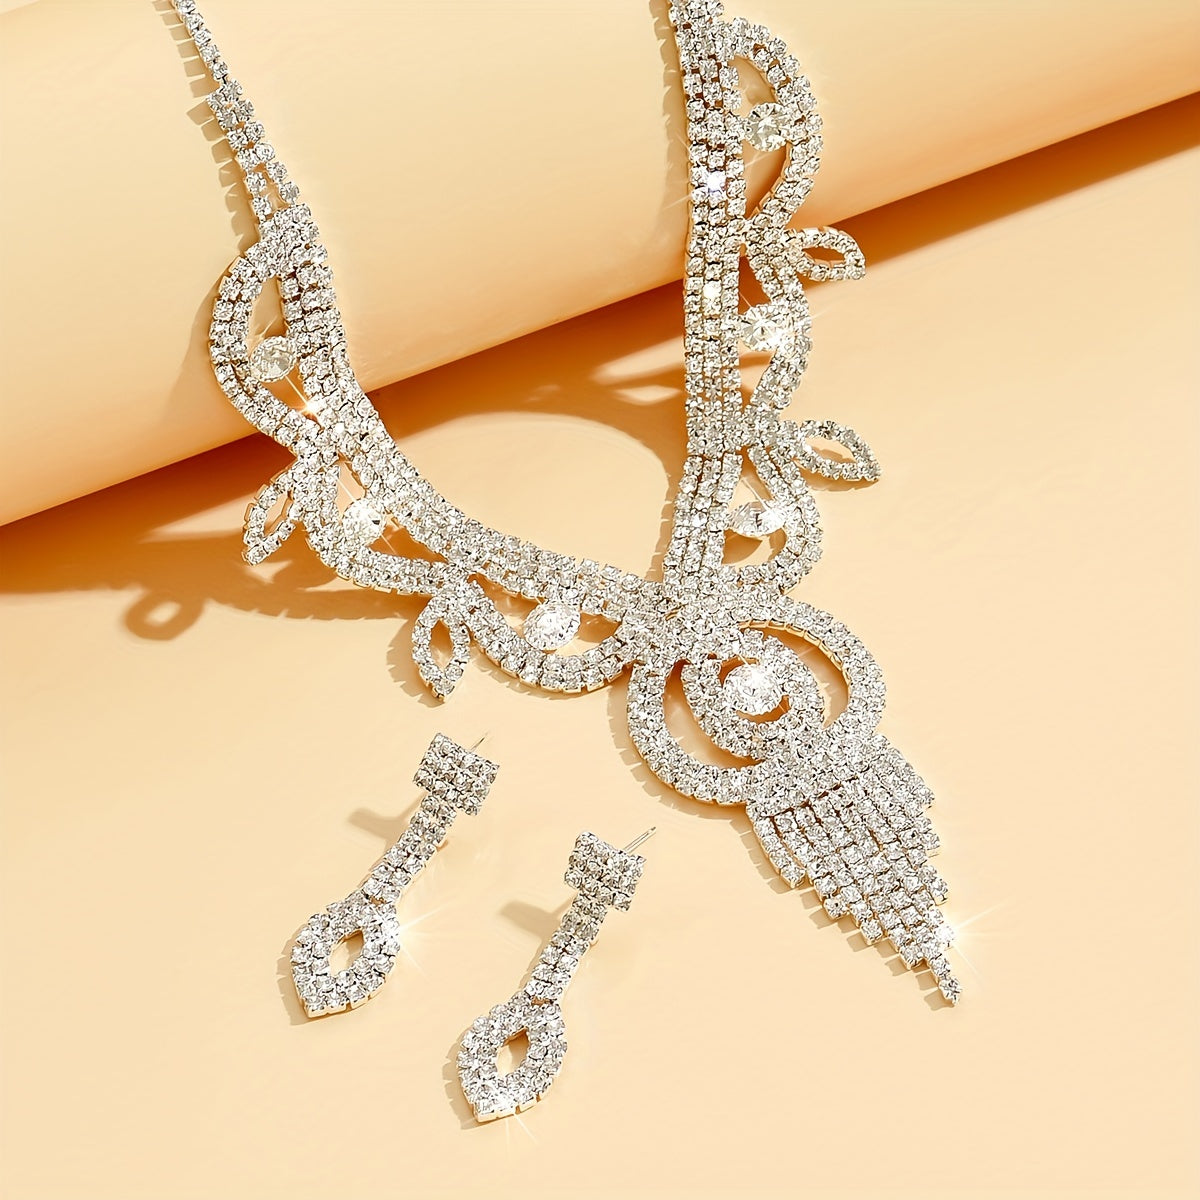 3pcs Earrings Plus Necklace Elegant Jewelry Set Silver Plated Inlaid Rhinestone Evening Party Decor Wedding Jewelry For Female